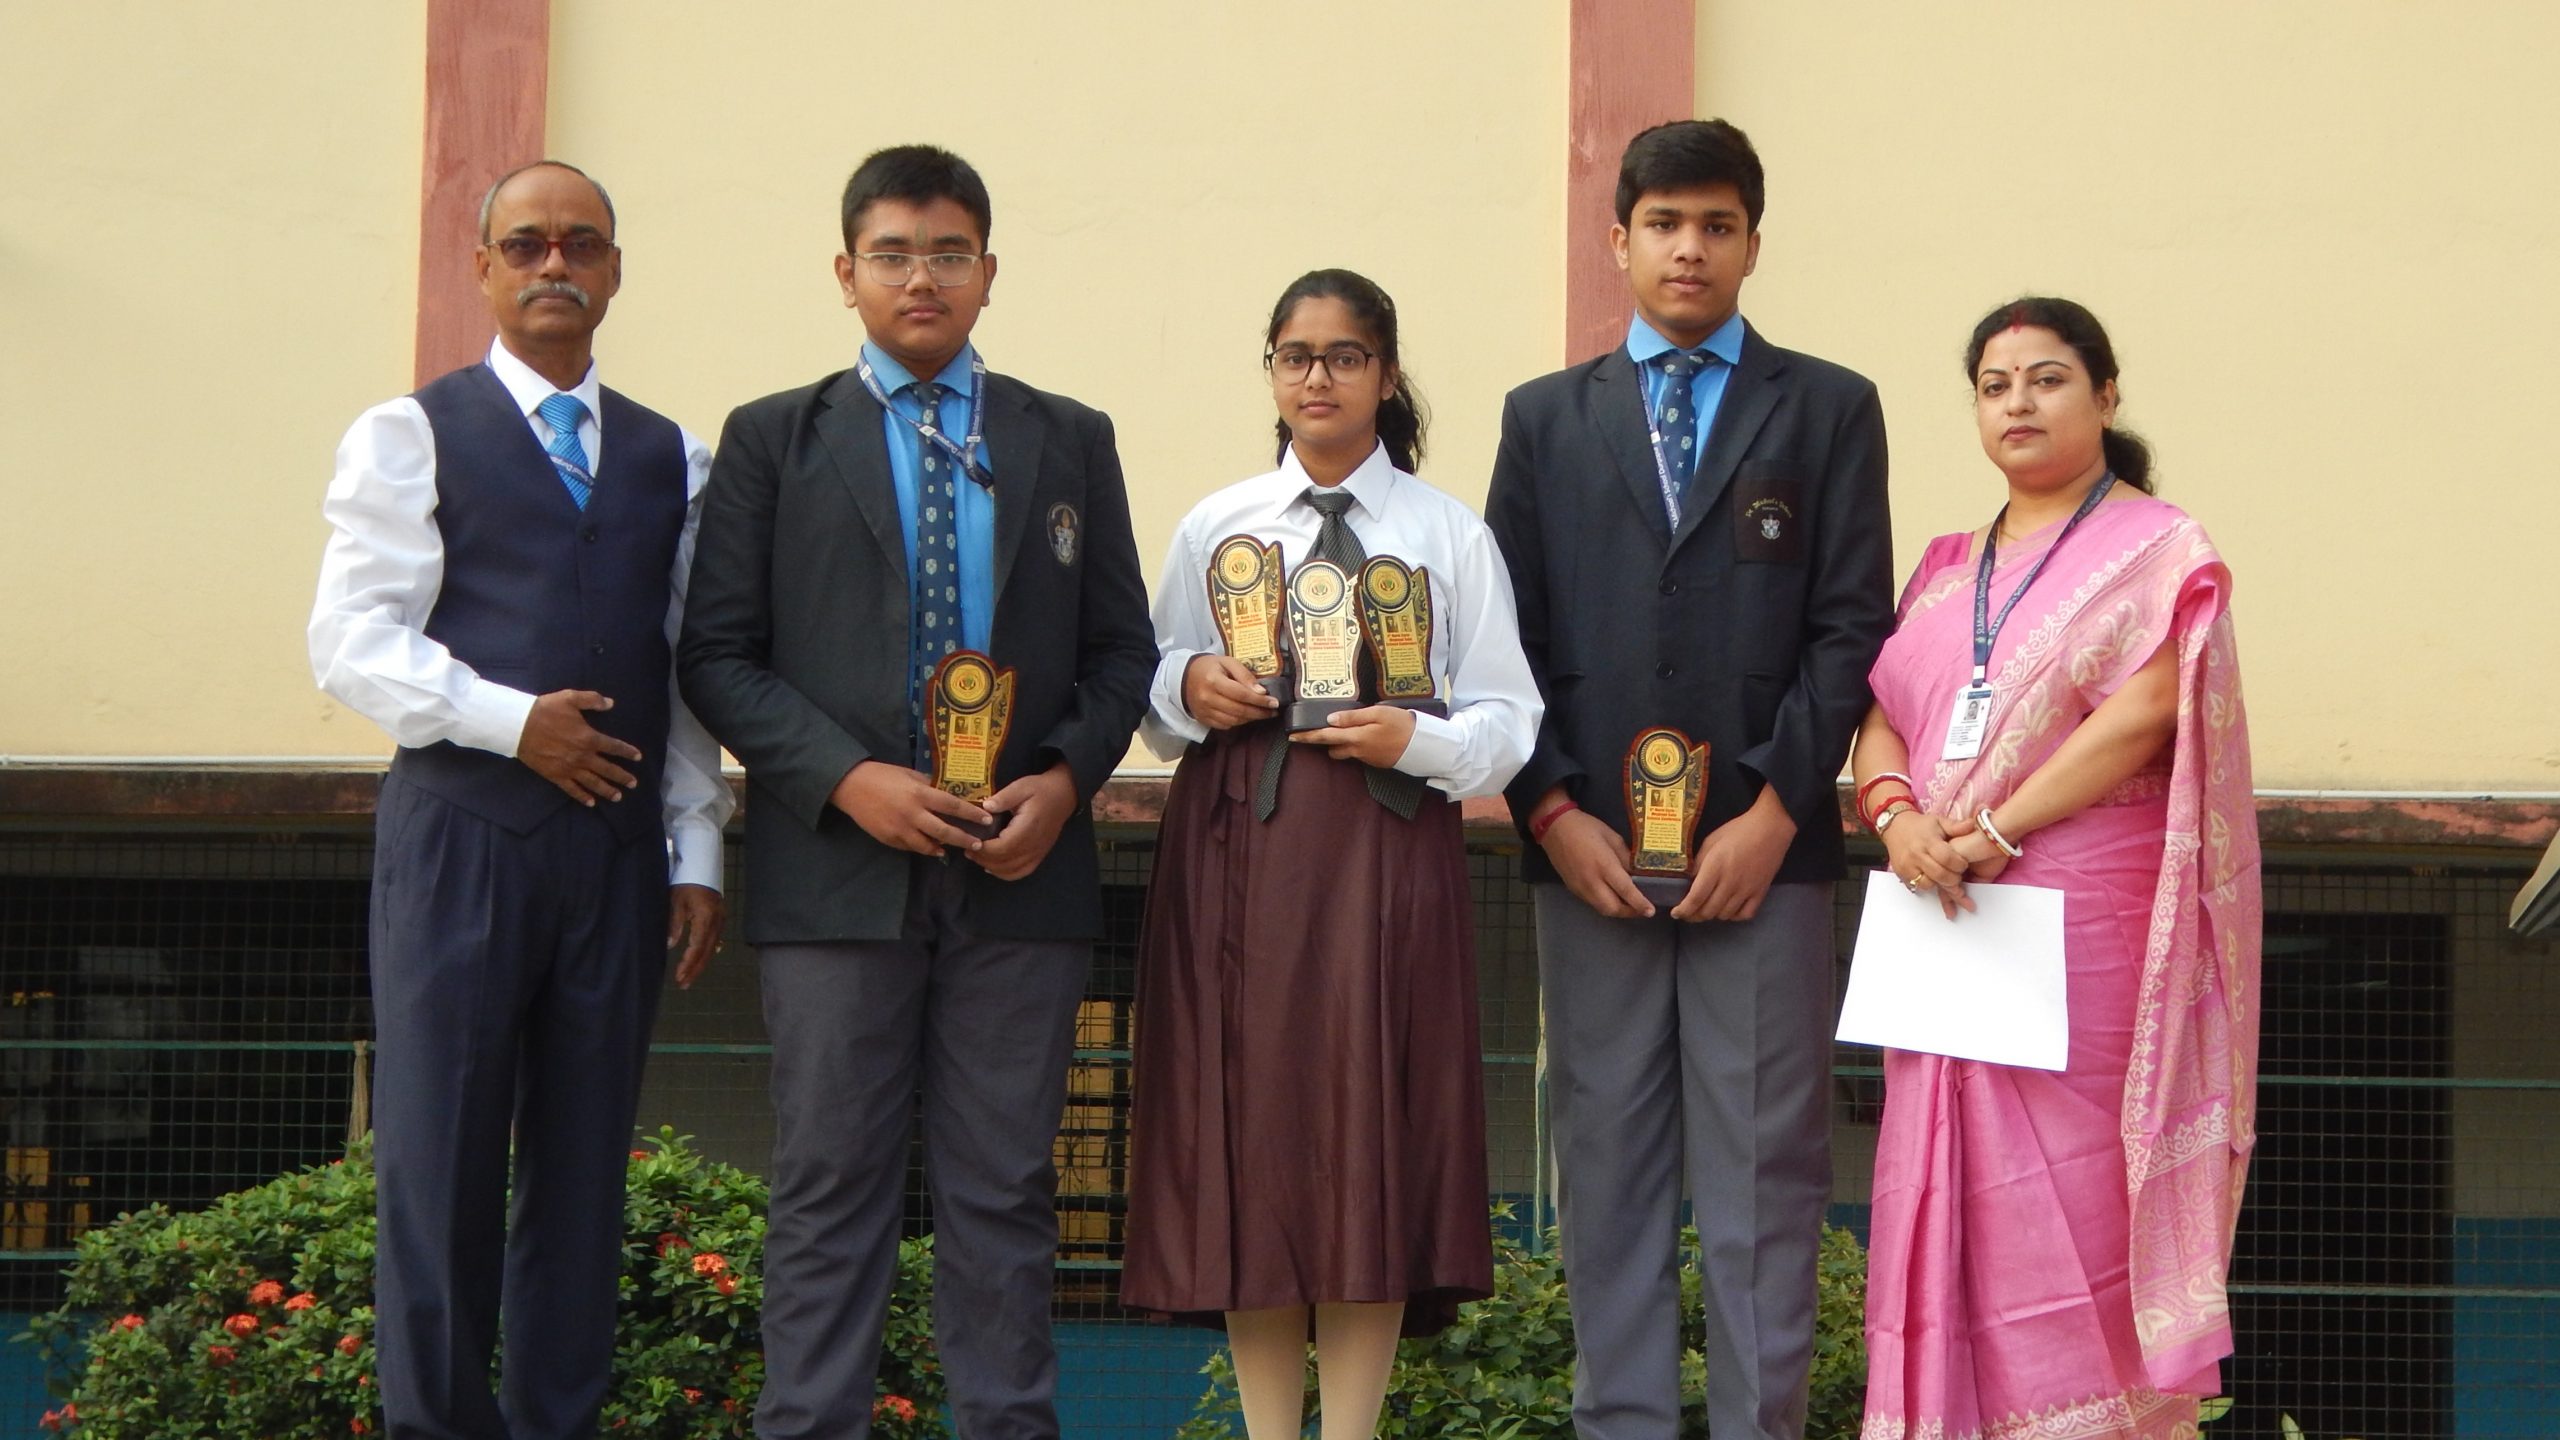 FELICITATION OF WINNERS OF 4TH MARIE CURIE MEGHNAD SAHA SCIENCE CONFERENCE